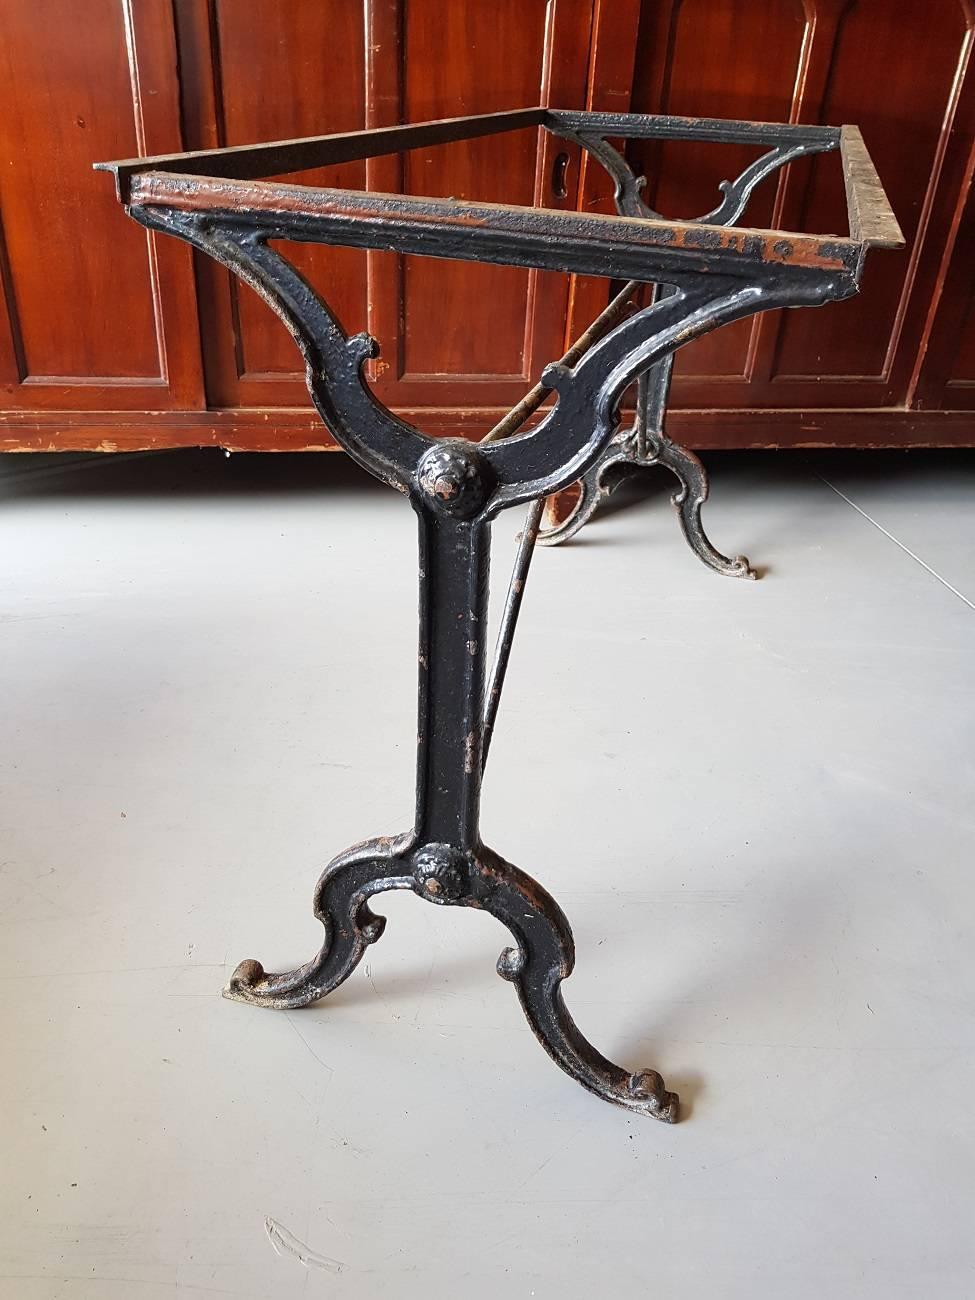 Large model old French cast-iron bistro table from the early 20th century.

The measurements are:
Depth 46 cm/ 18.1 inch.
Width 110 cm/ 43.3 inch.
Height 70 cm/ 27.5 inch.
 